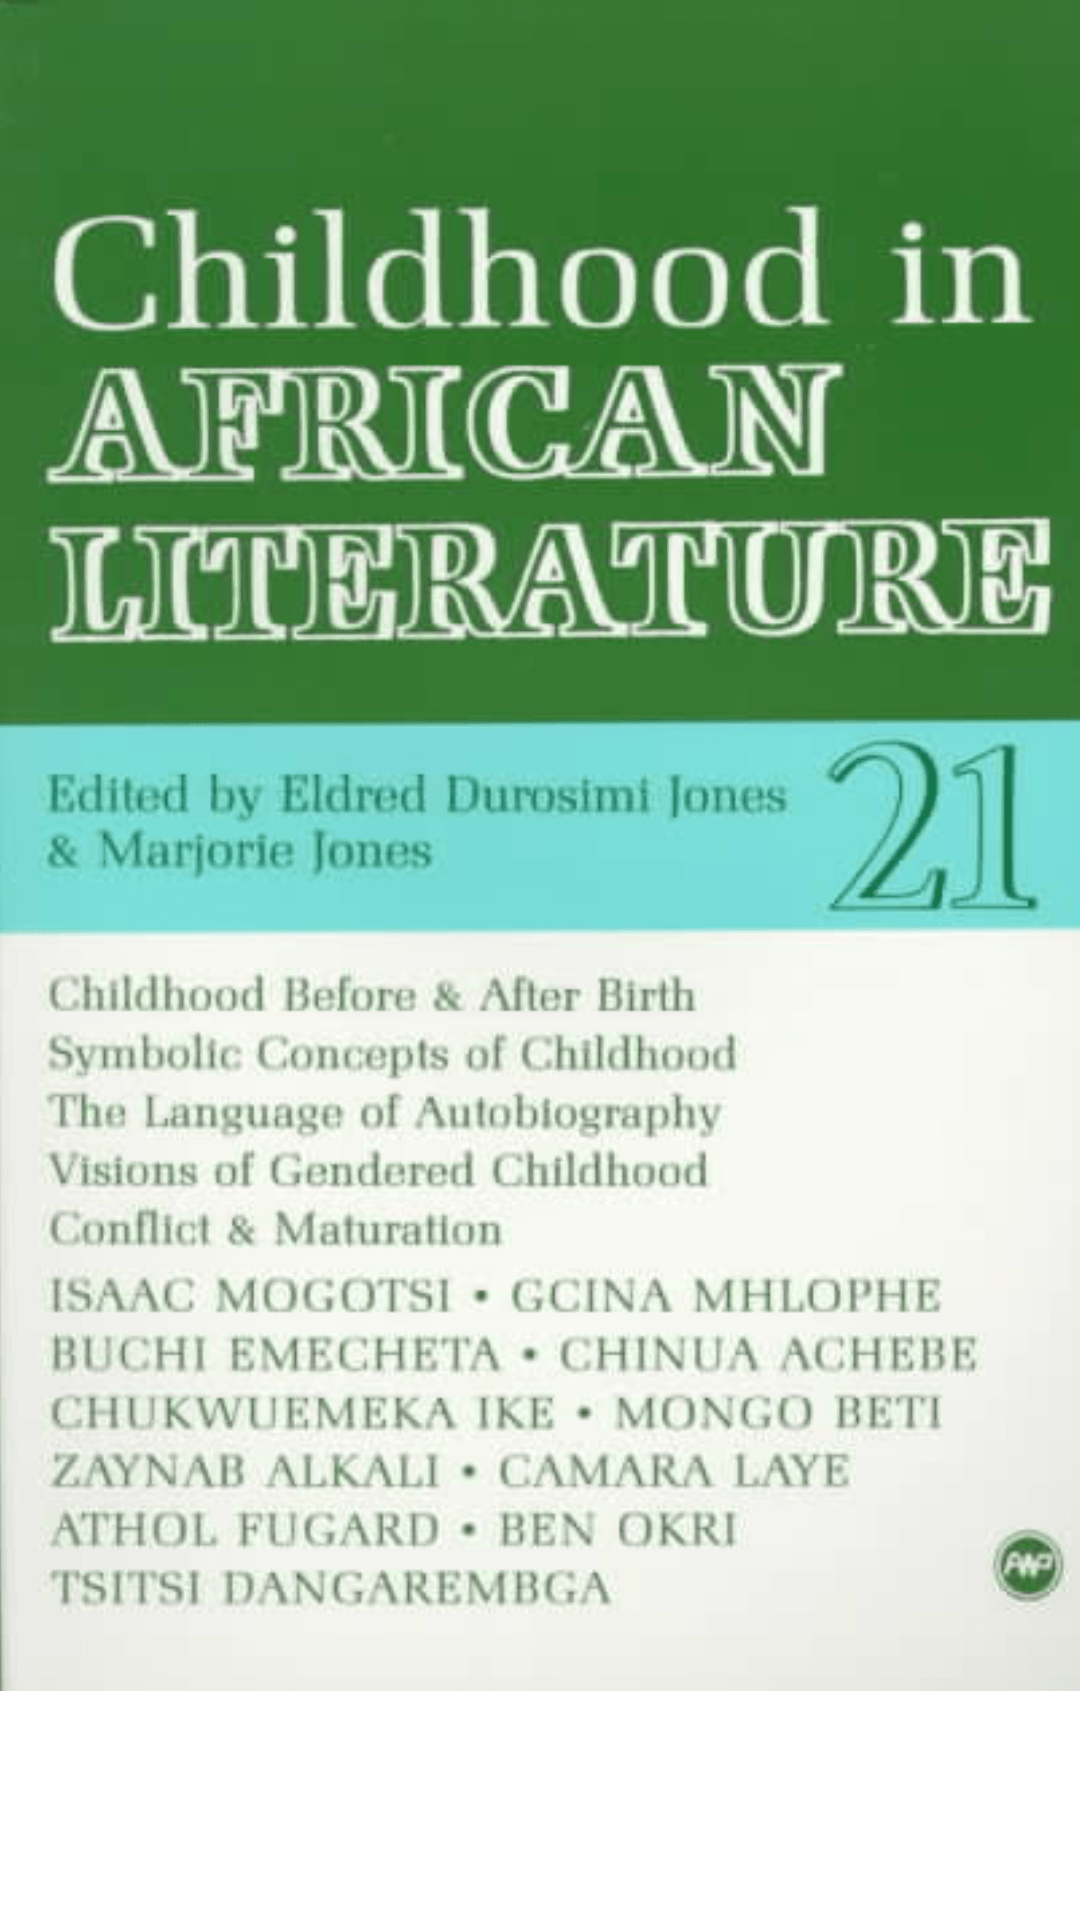 Childhood in African Literature: A Review; 21